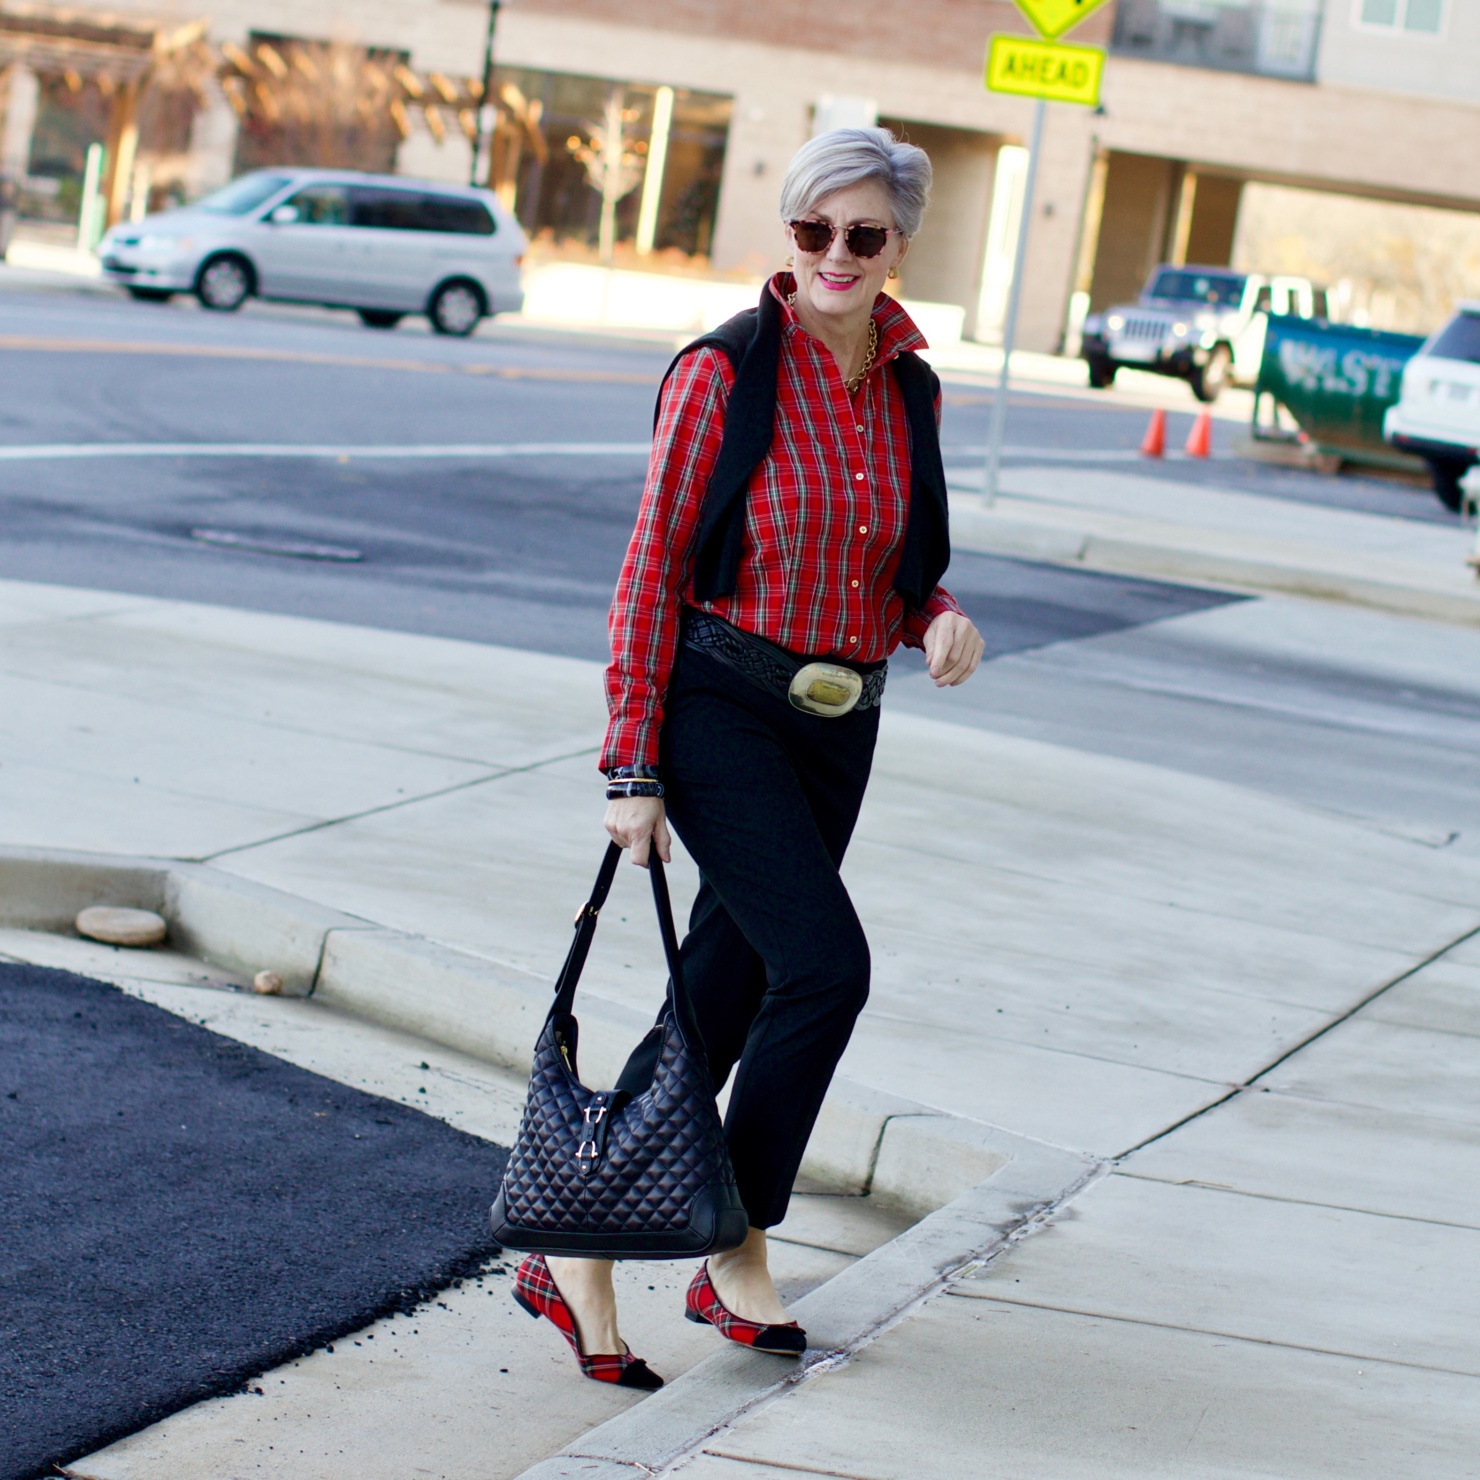 beth from Style at a Certain Age wears a tartan plaid shirt, black cropped ankle pants, tartan plaid flats, military coat and quilted hobo handbag.